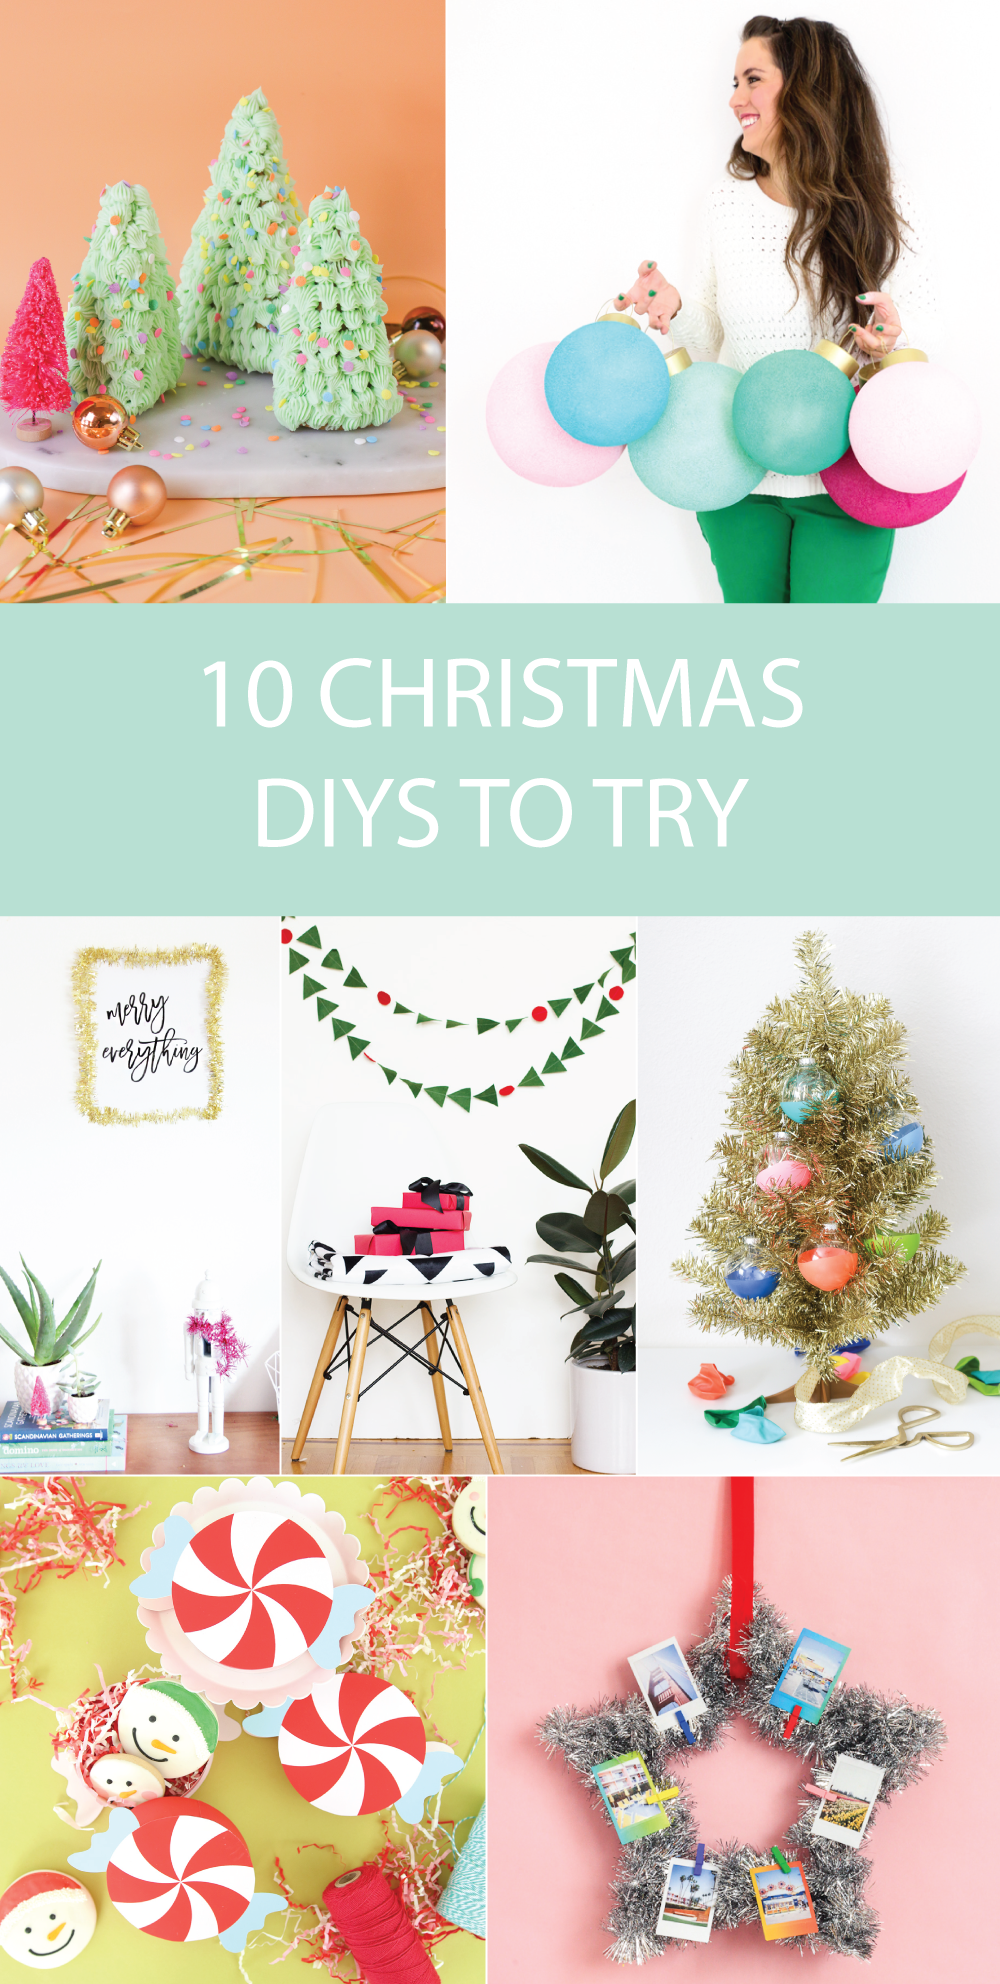 10 Last-Minute Christmas DIYs to Try this Weekend | Club Crafted